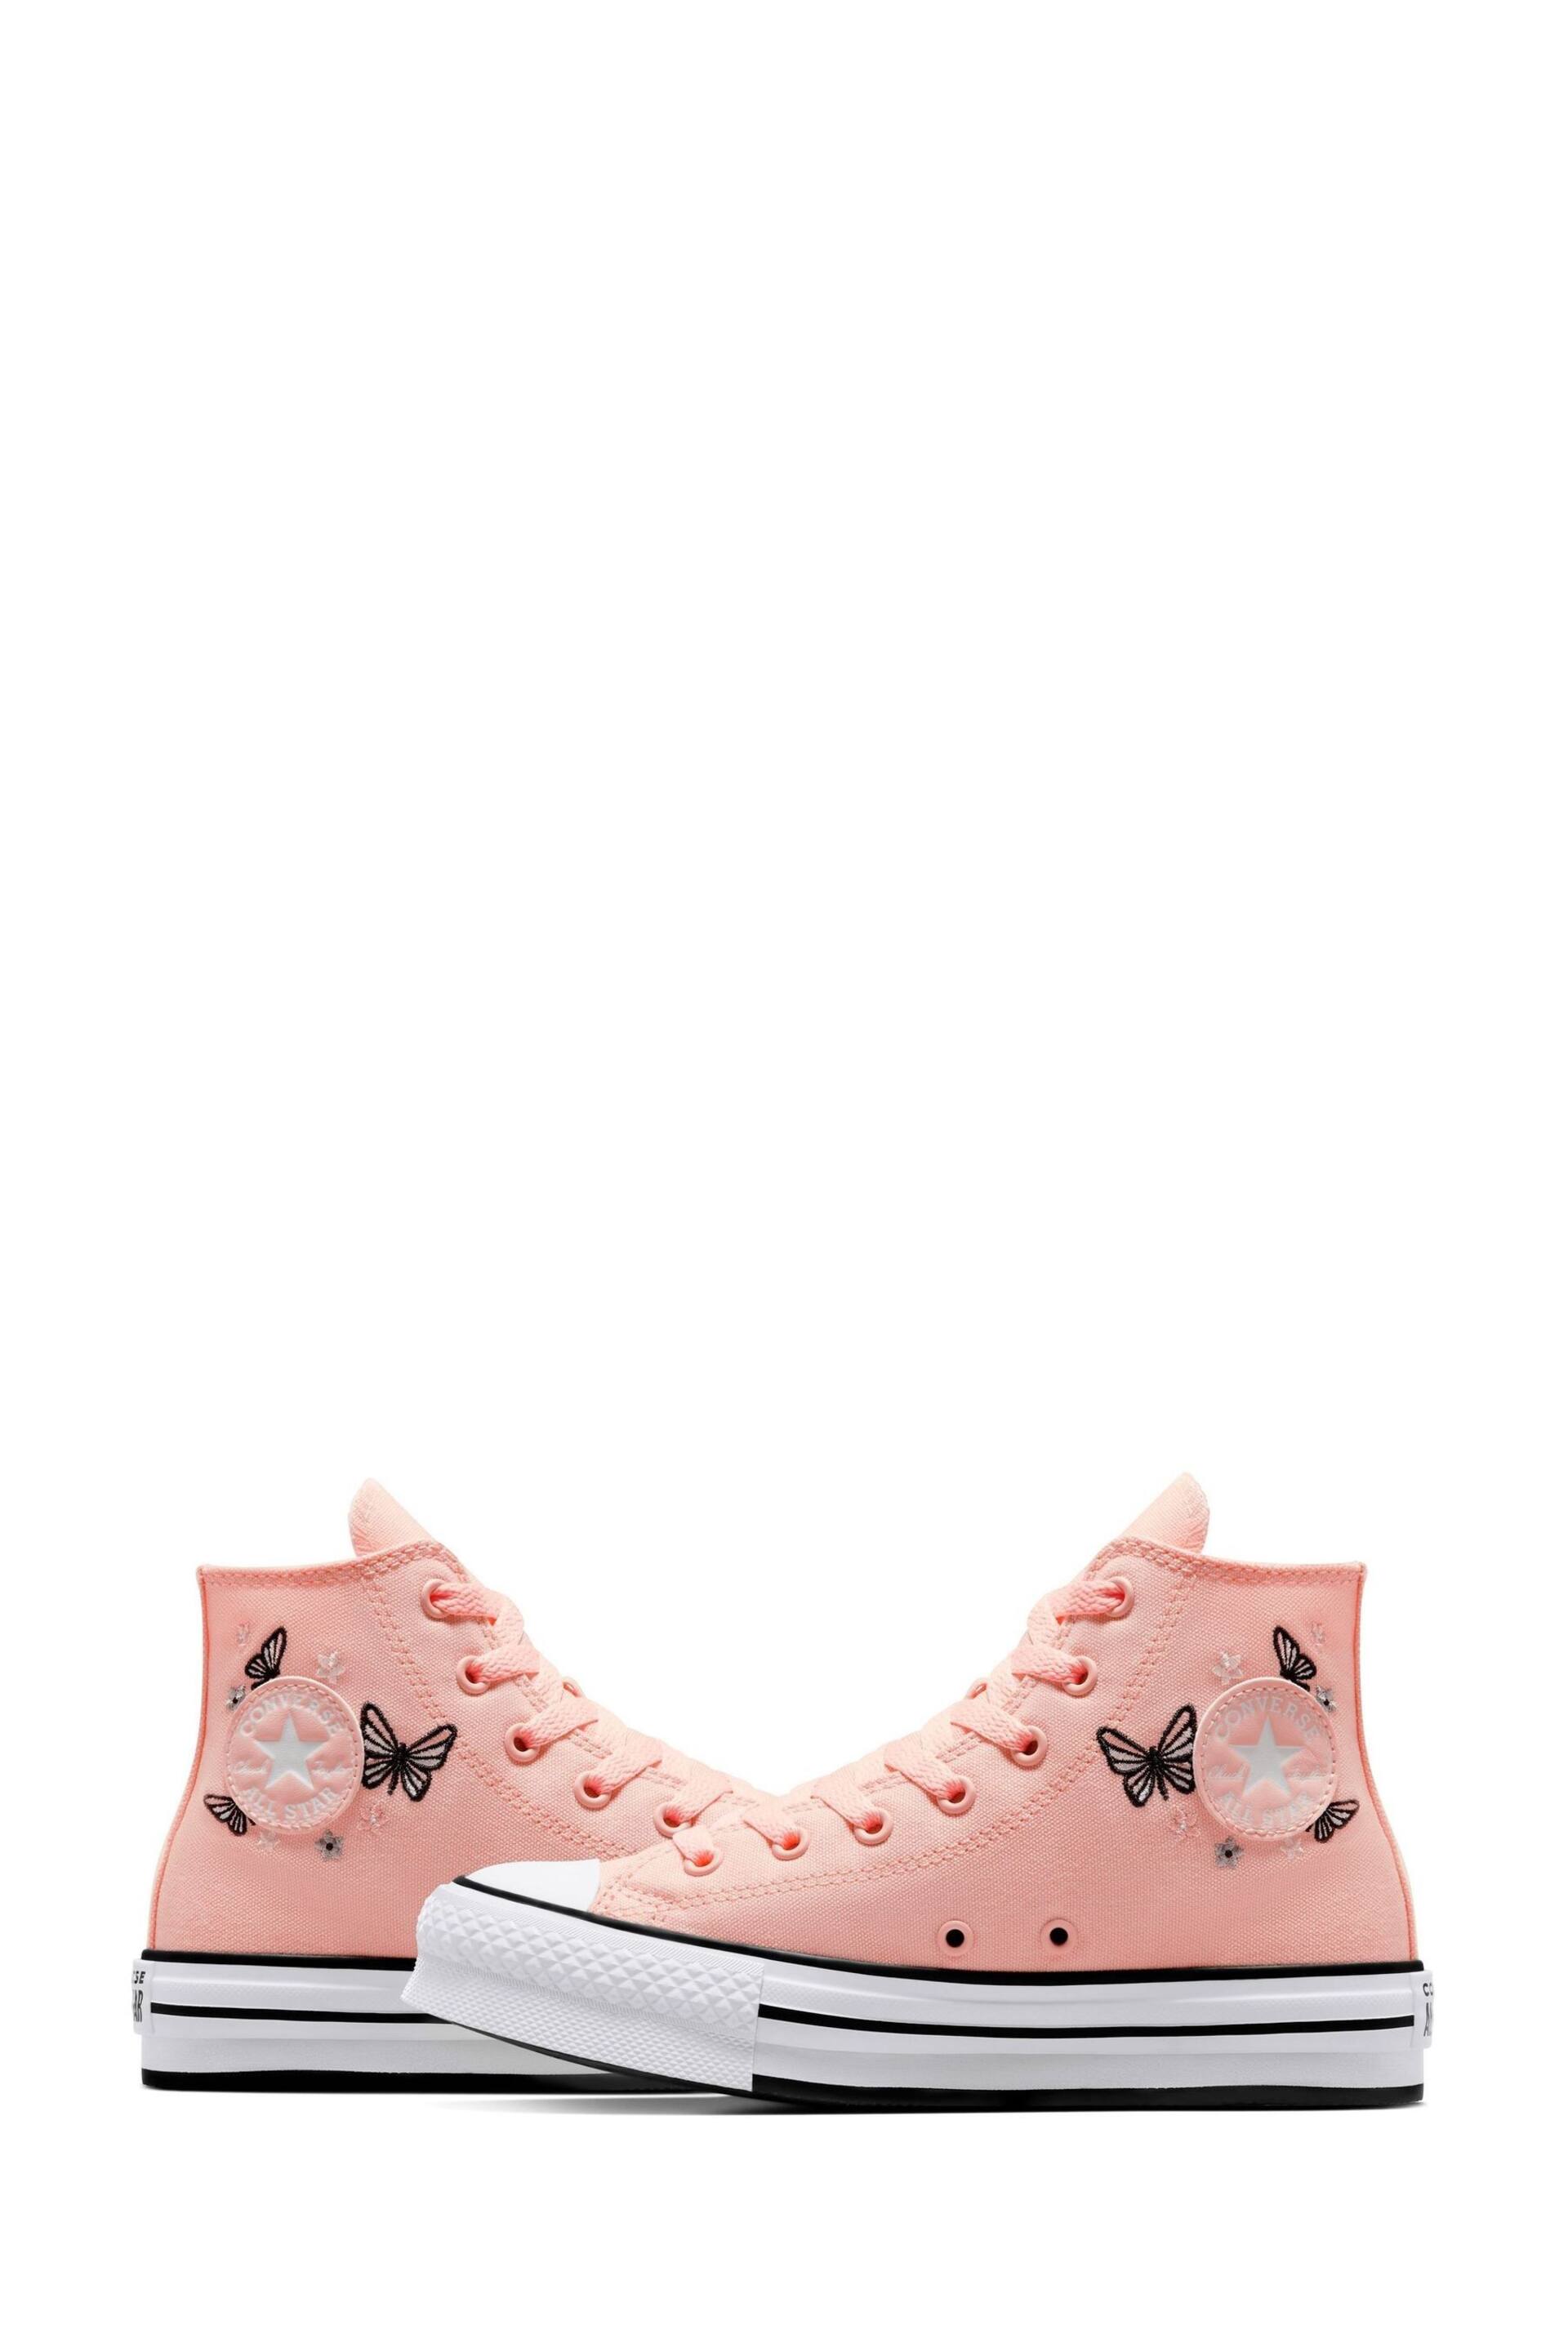 Converse Pink Butterfly Embroidered EVA Lift Youth Trainers - Image 6 of 9